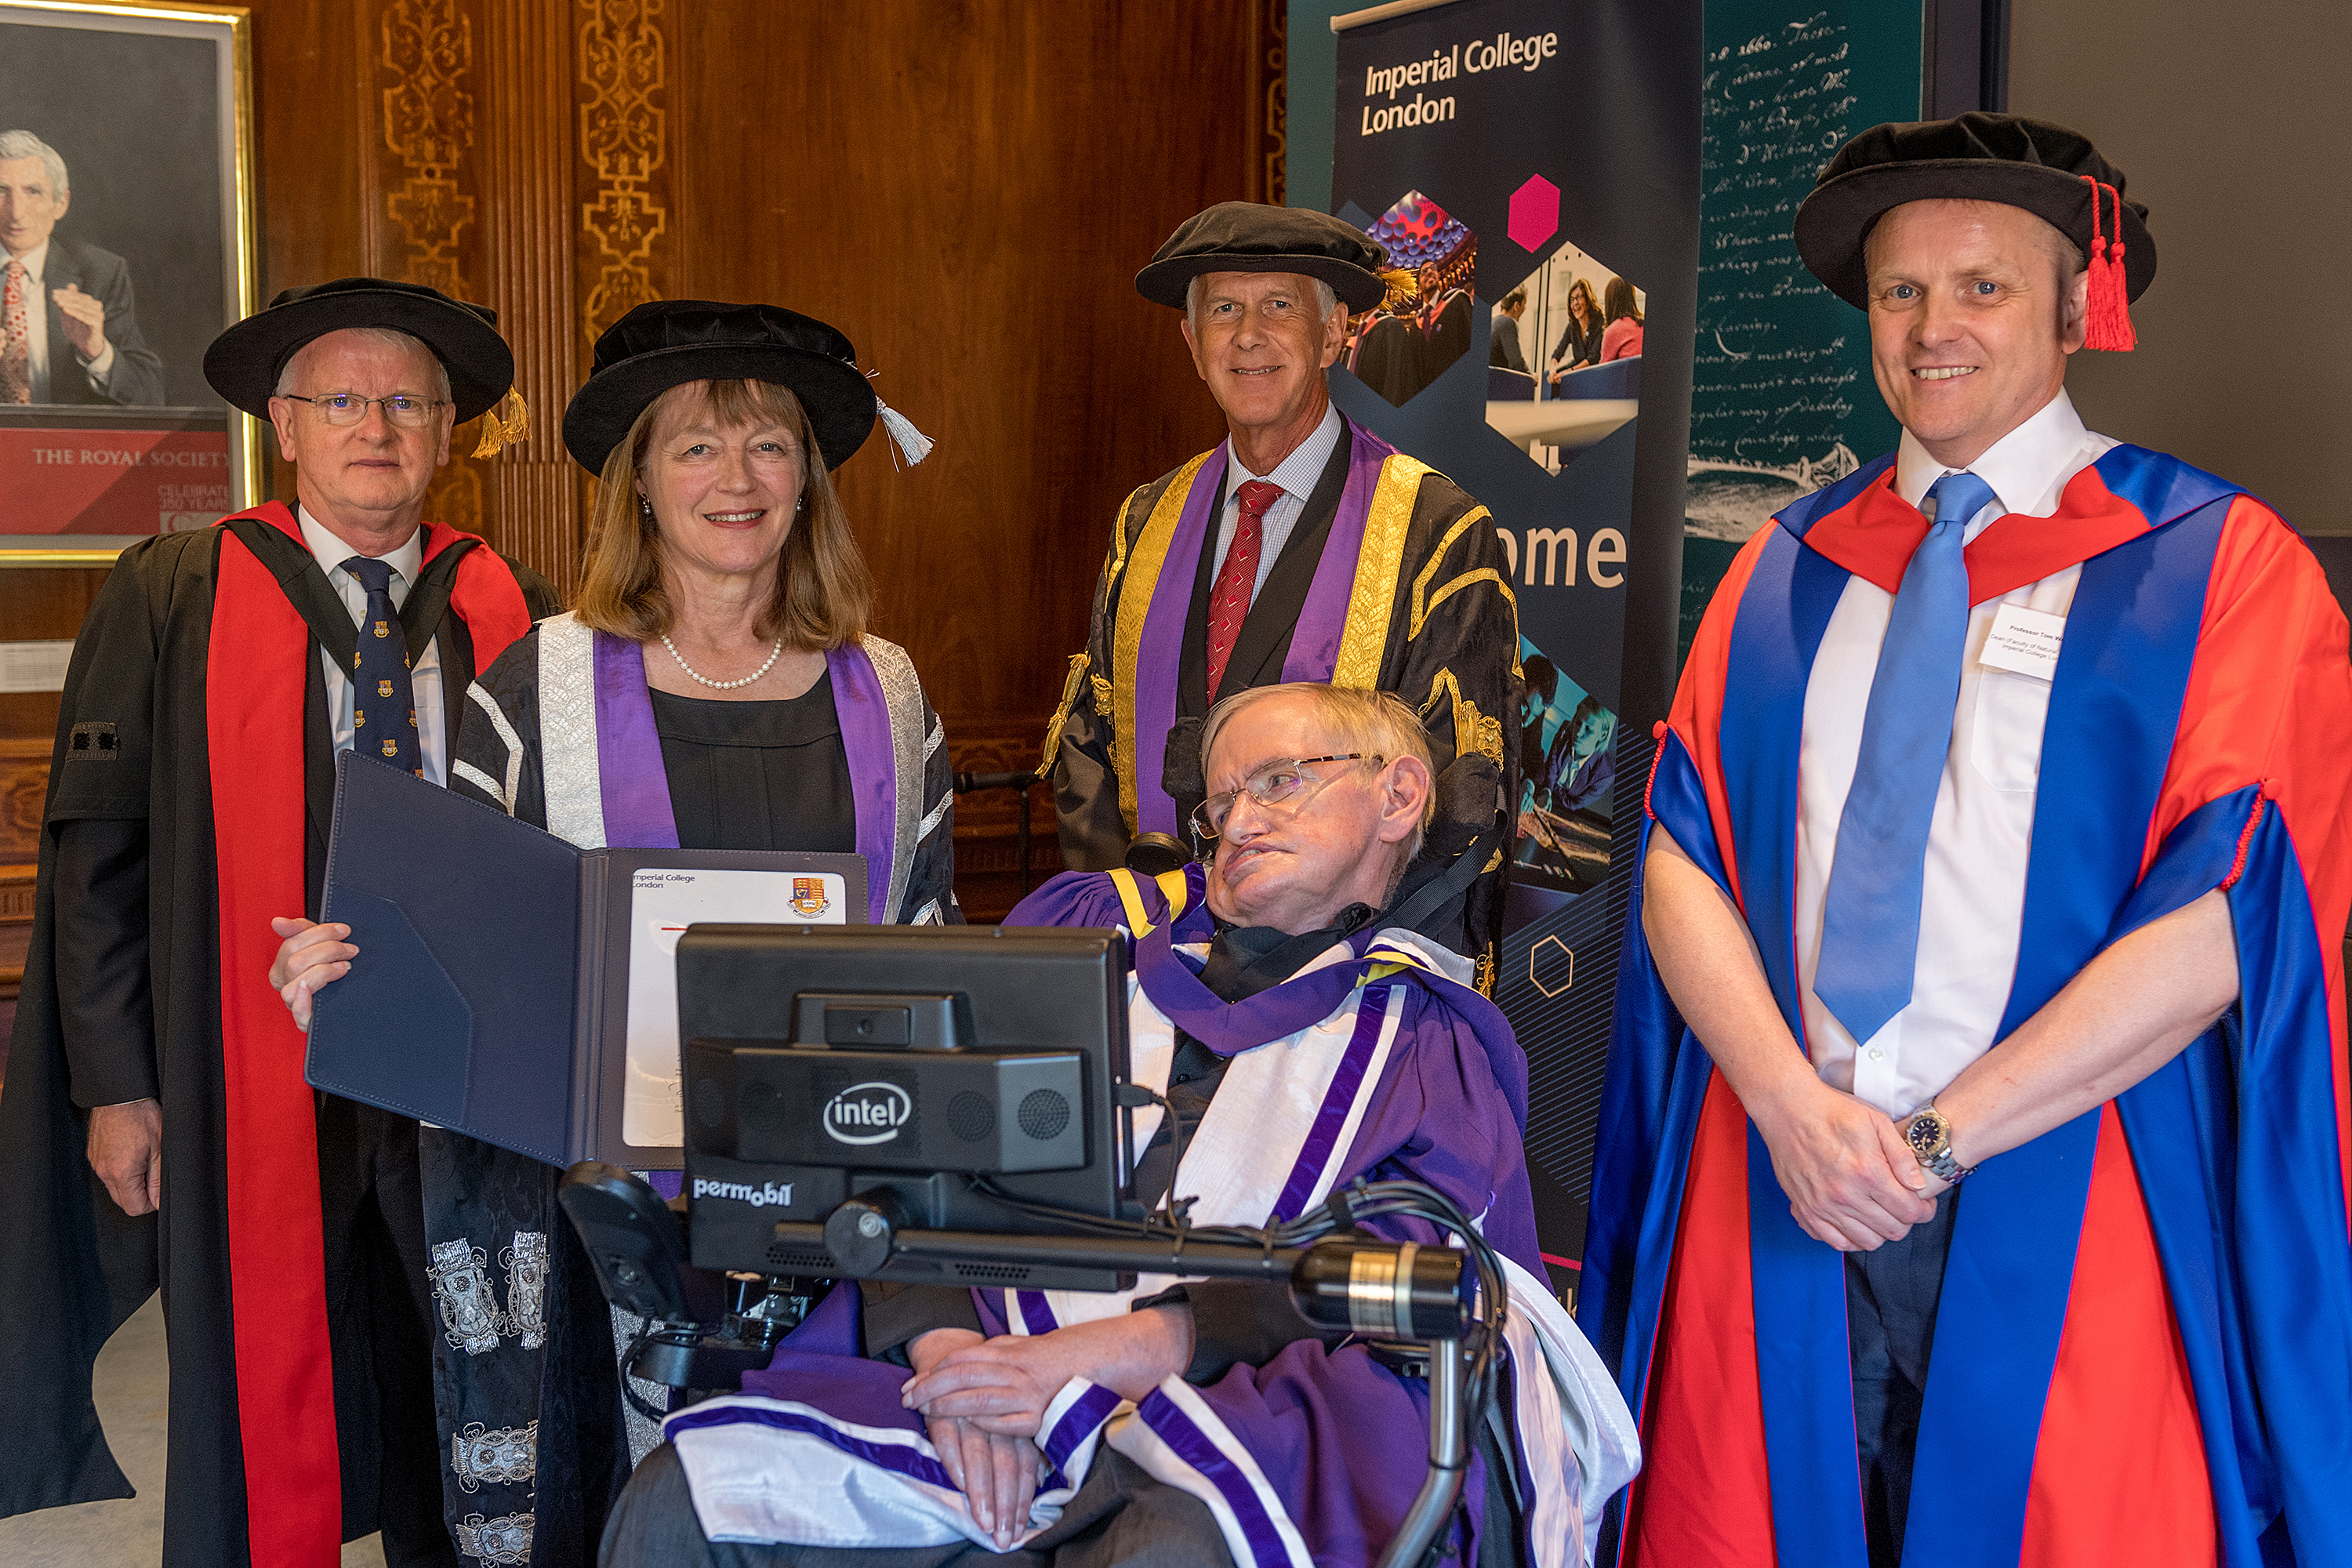 World renowned scientist Professor Stephen Hawking receiving his honorary doctorate from Imperial President Alice Gast in July 2017. Photography by Fergus Burnett